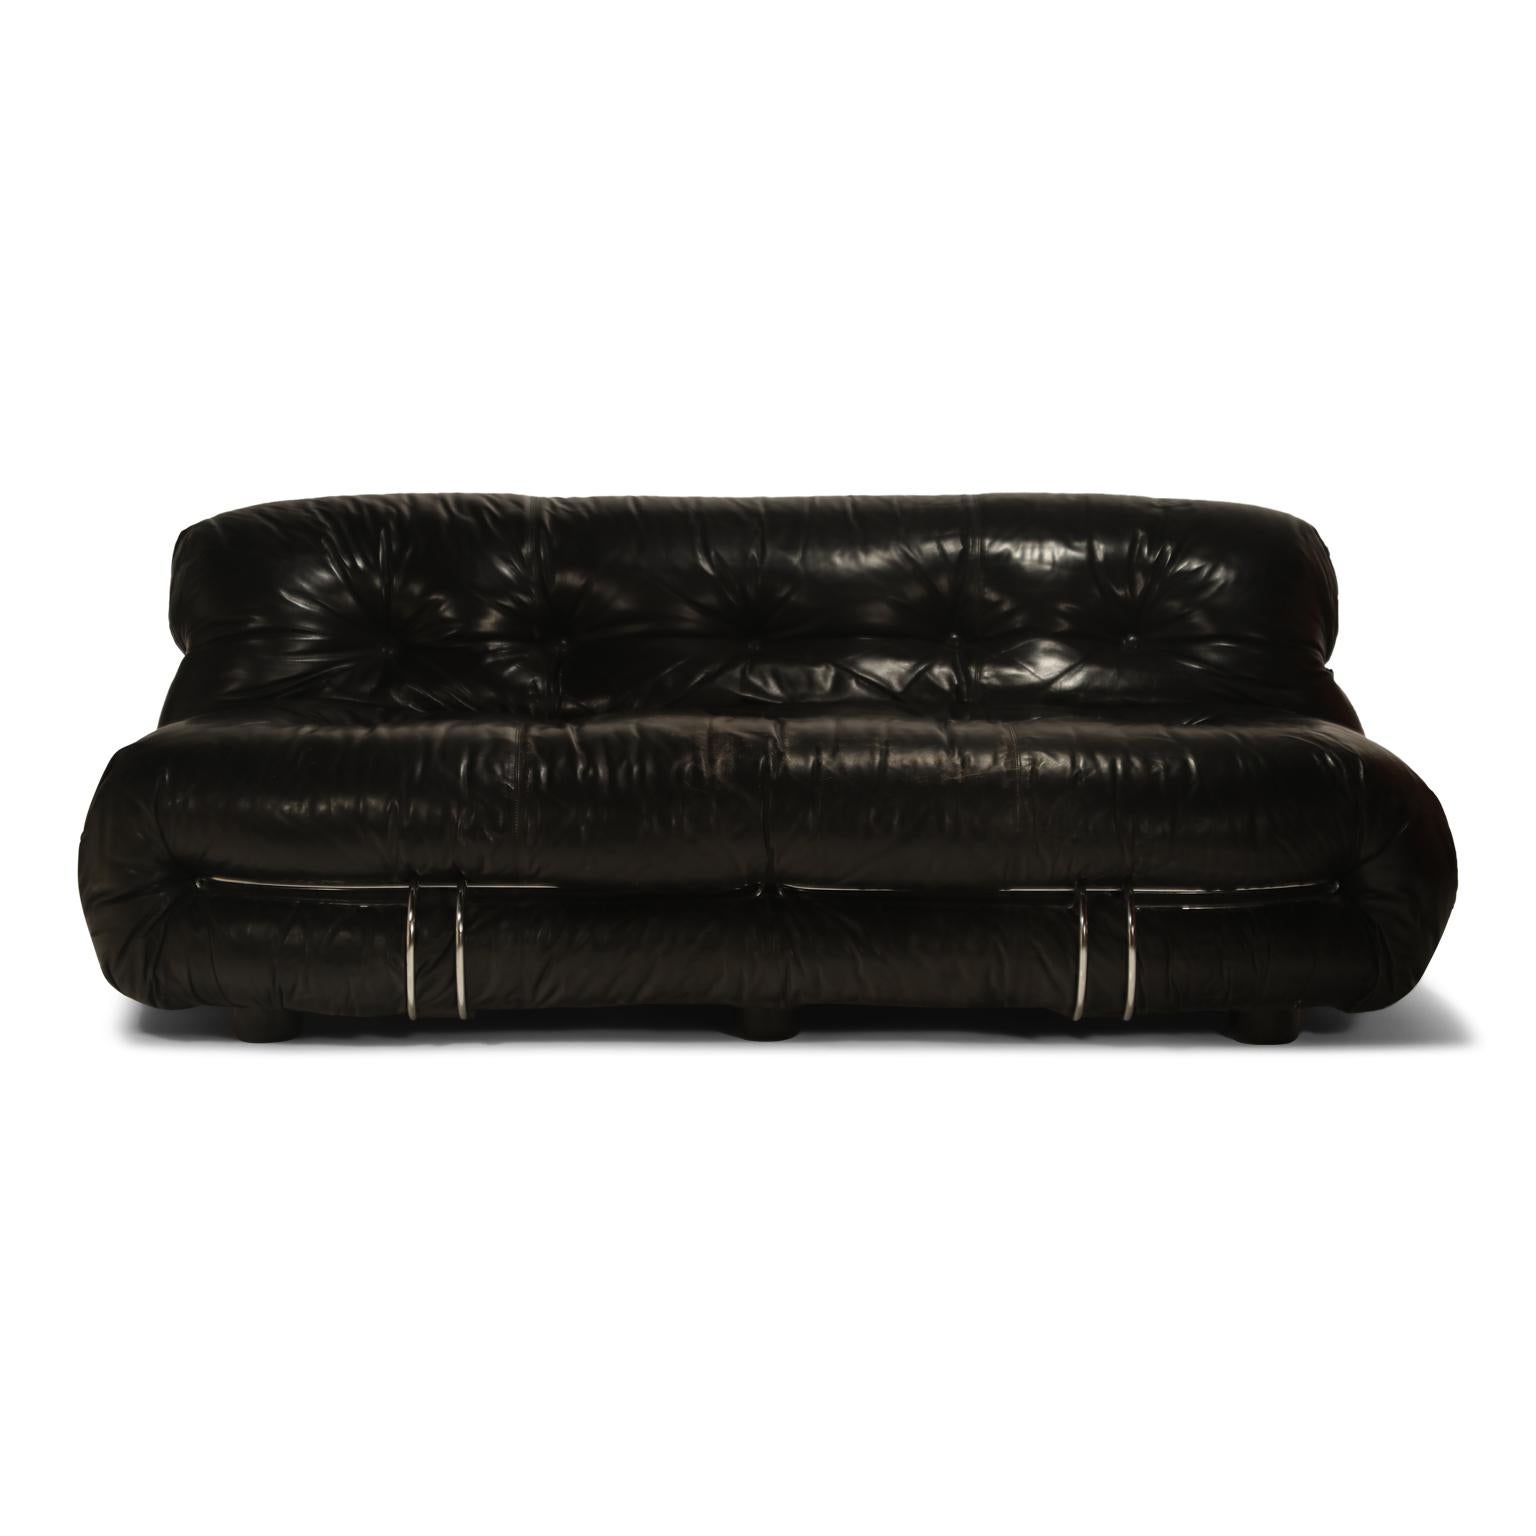 Get the wow-factor in this stunning deep black leather 